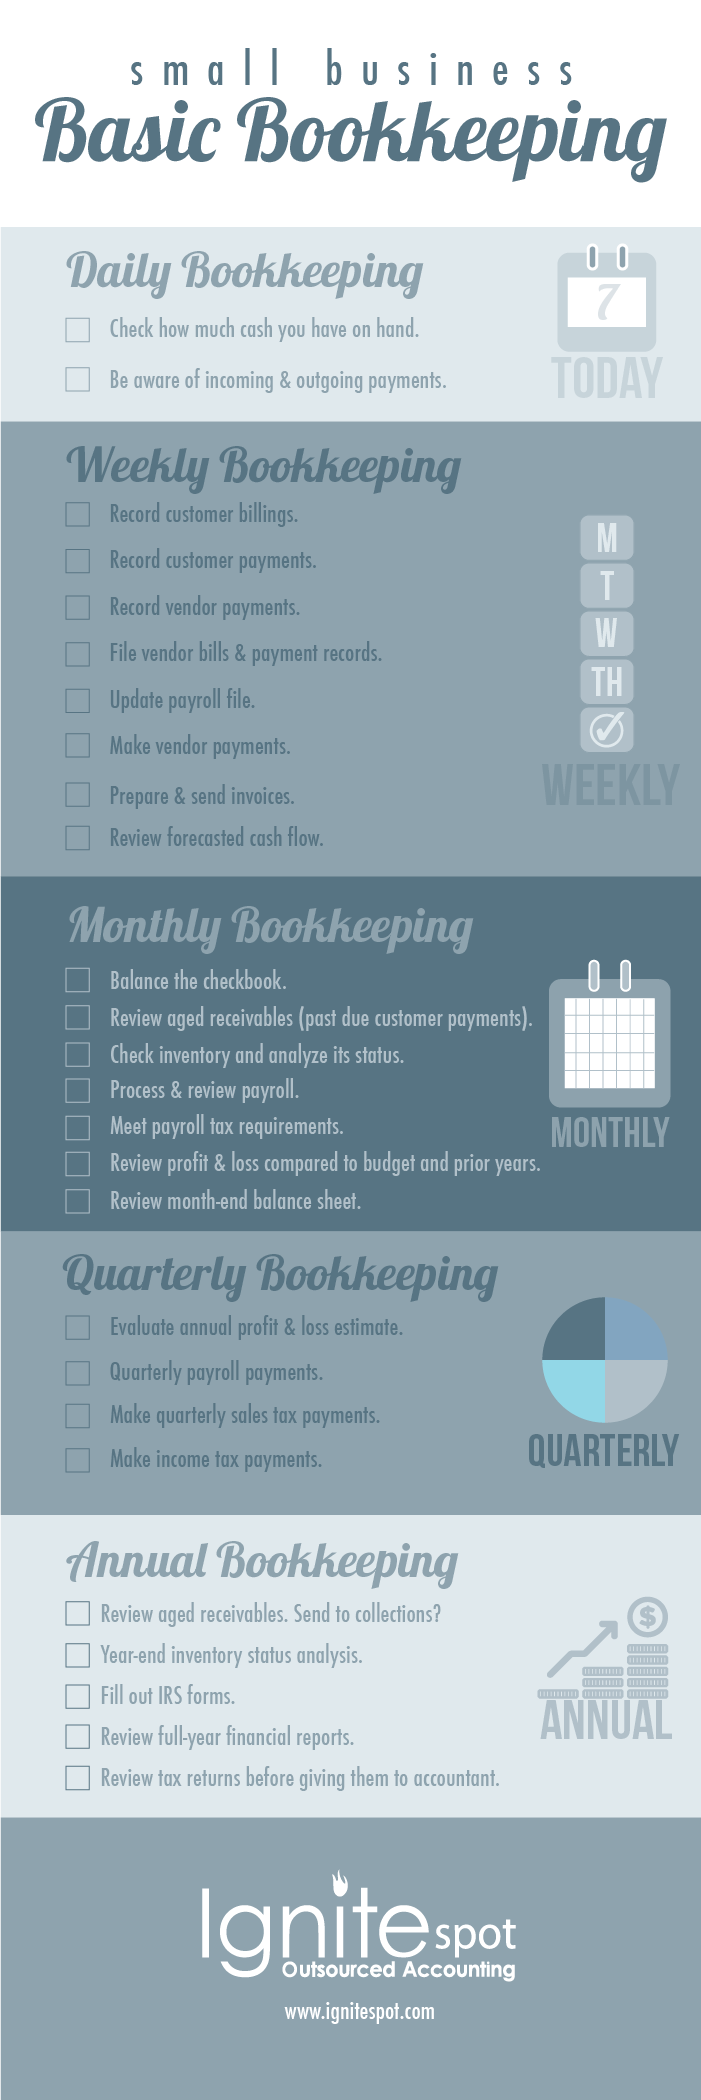 basic_bookkeeping_checklist.png